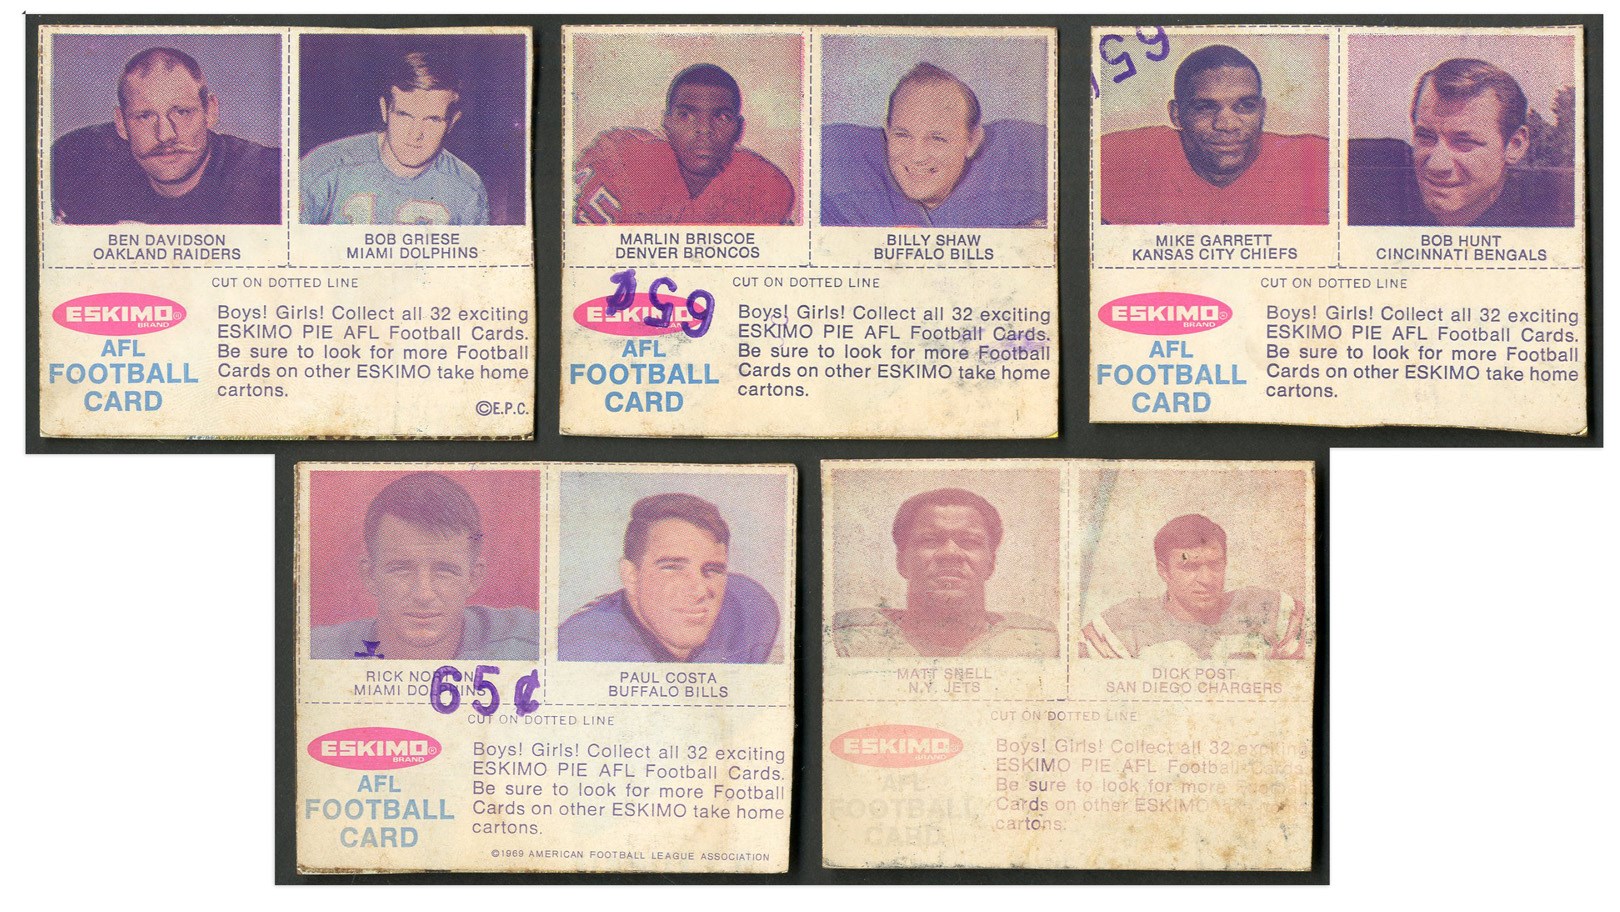 1969 Eskimo Pie AFL Football Cards (Lot of 5, with Griese)